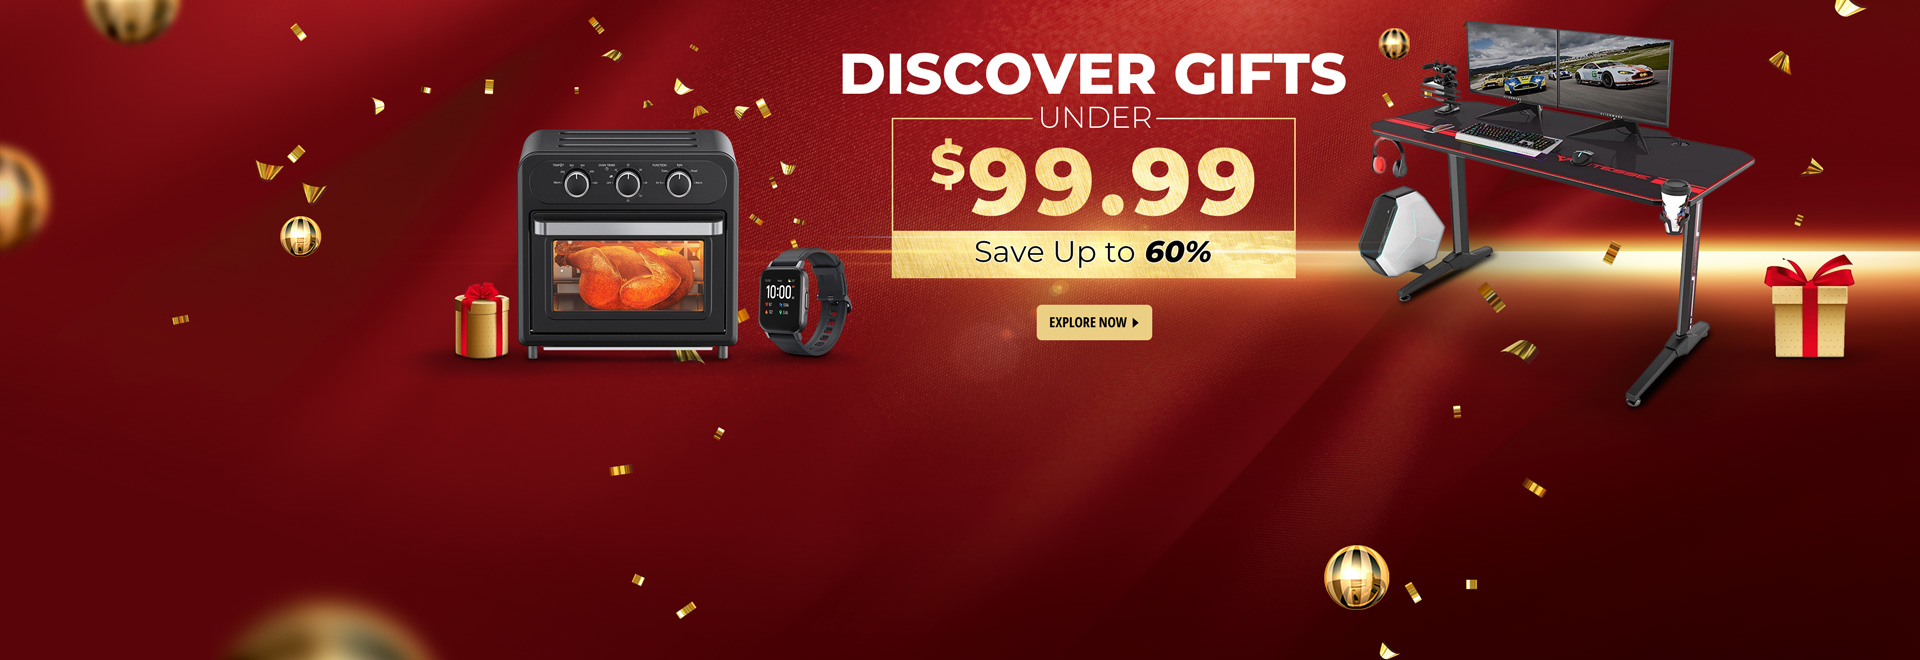 Discover Gifts